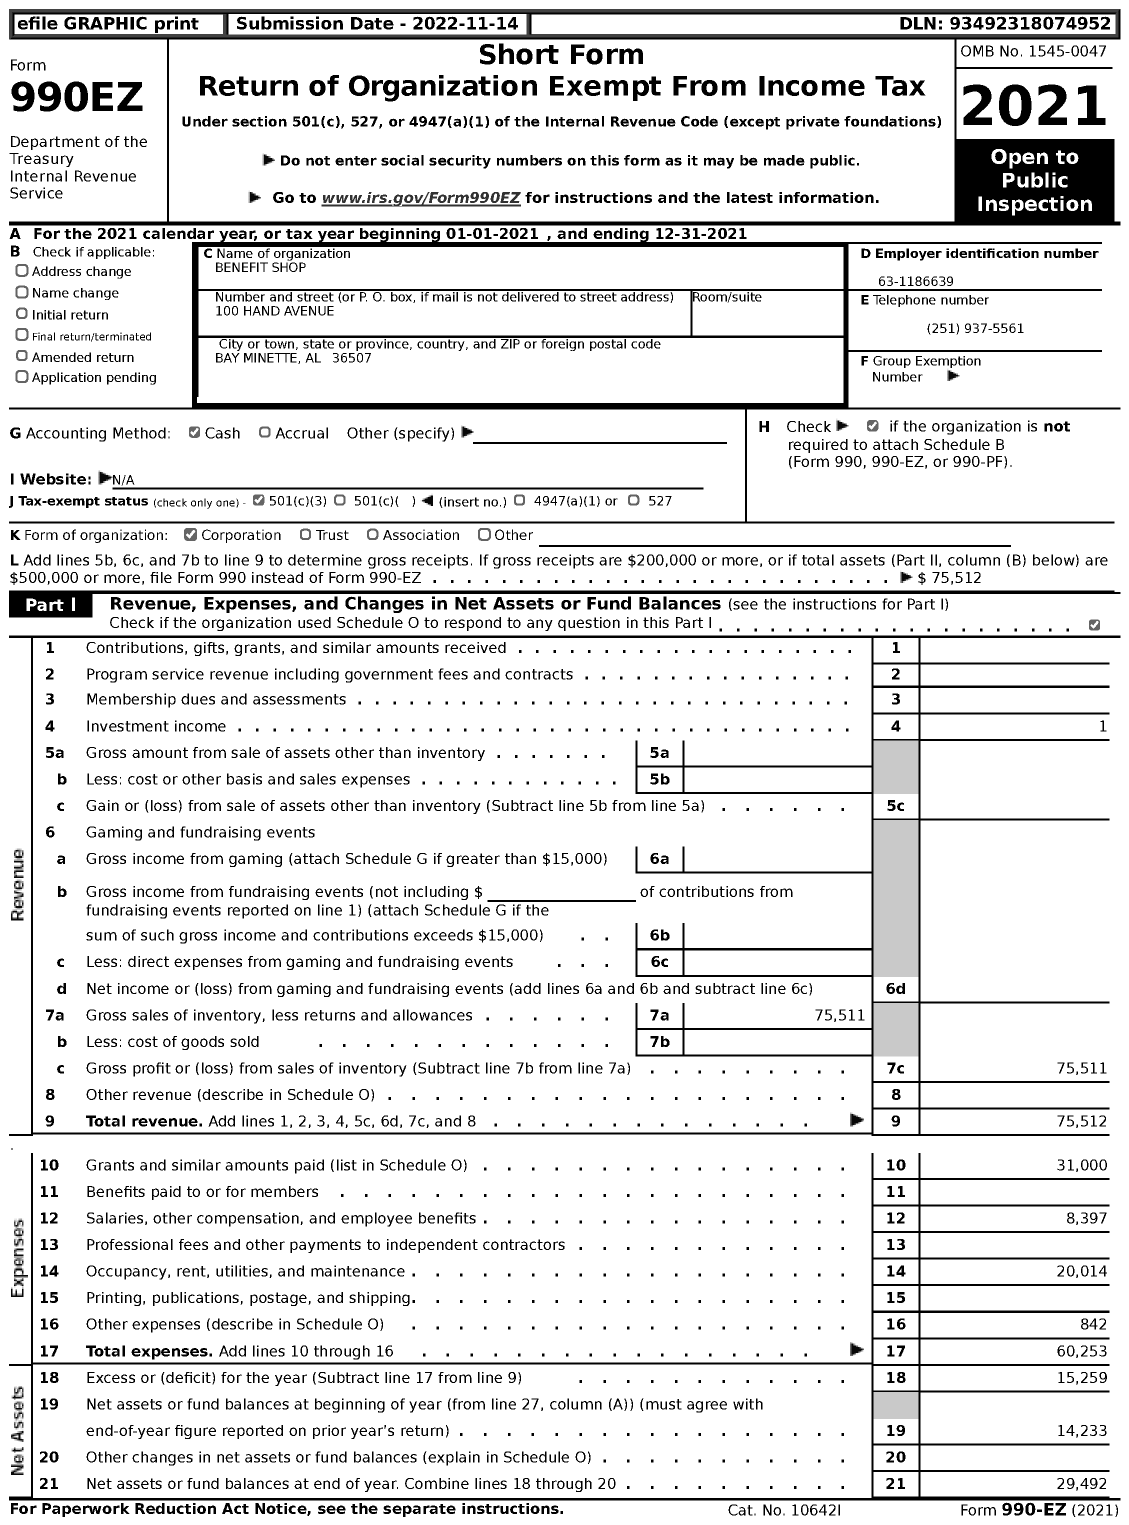 Image of first page of 2021 Form 990EZ for Benefit Shop